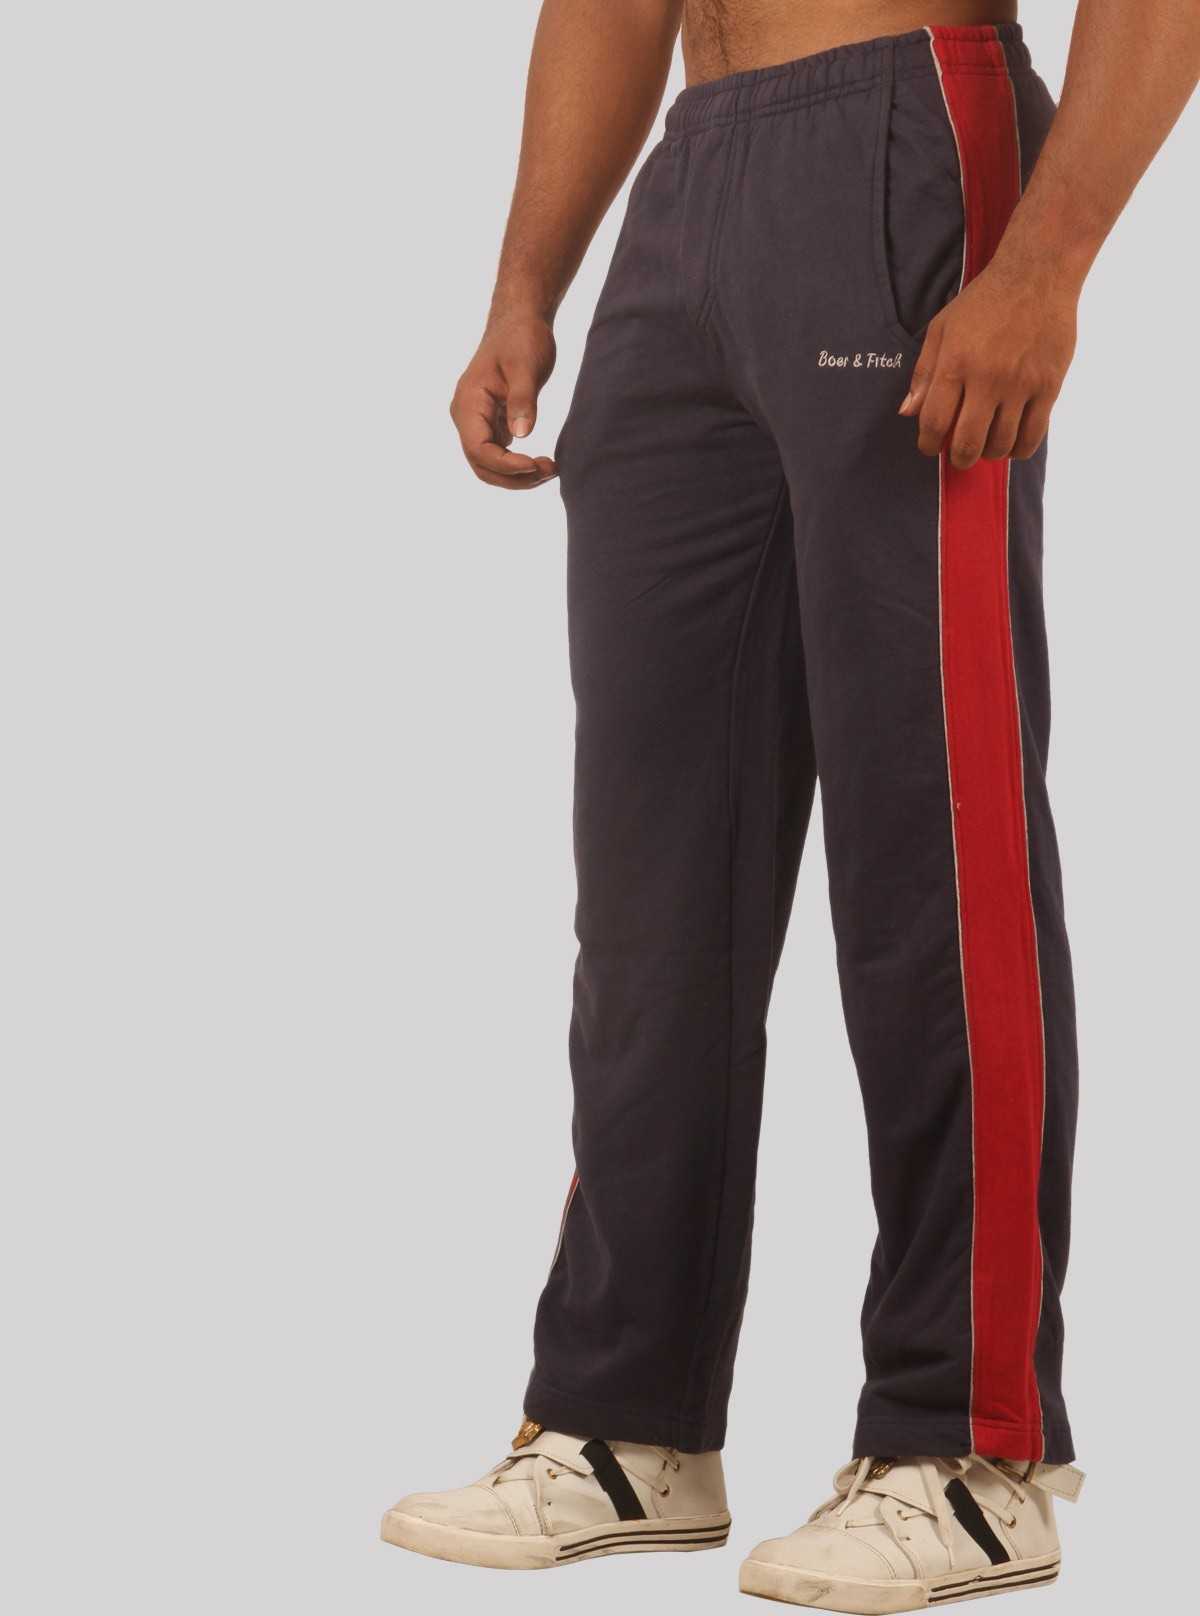 Red Pannel Track Pants Boer and Fitch - 1